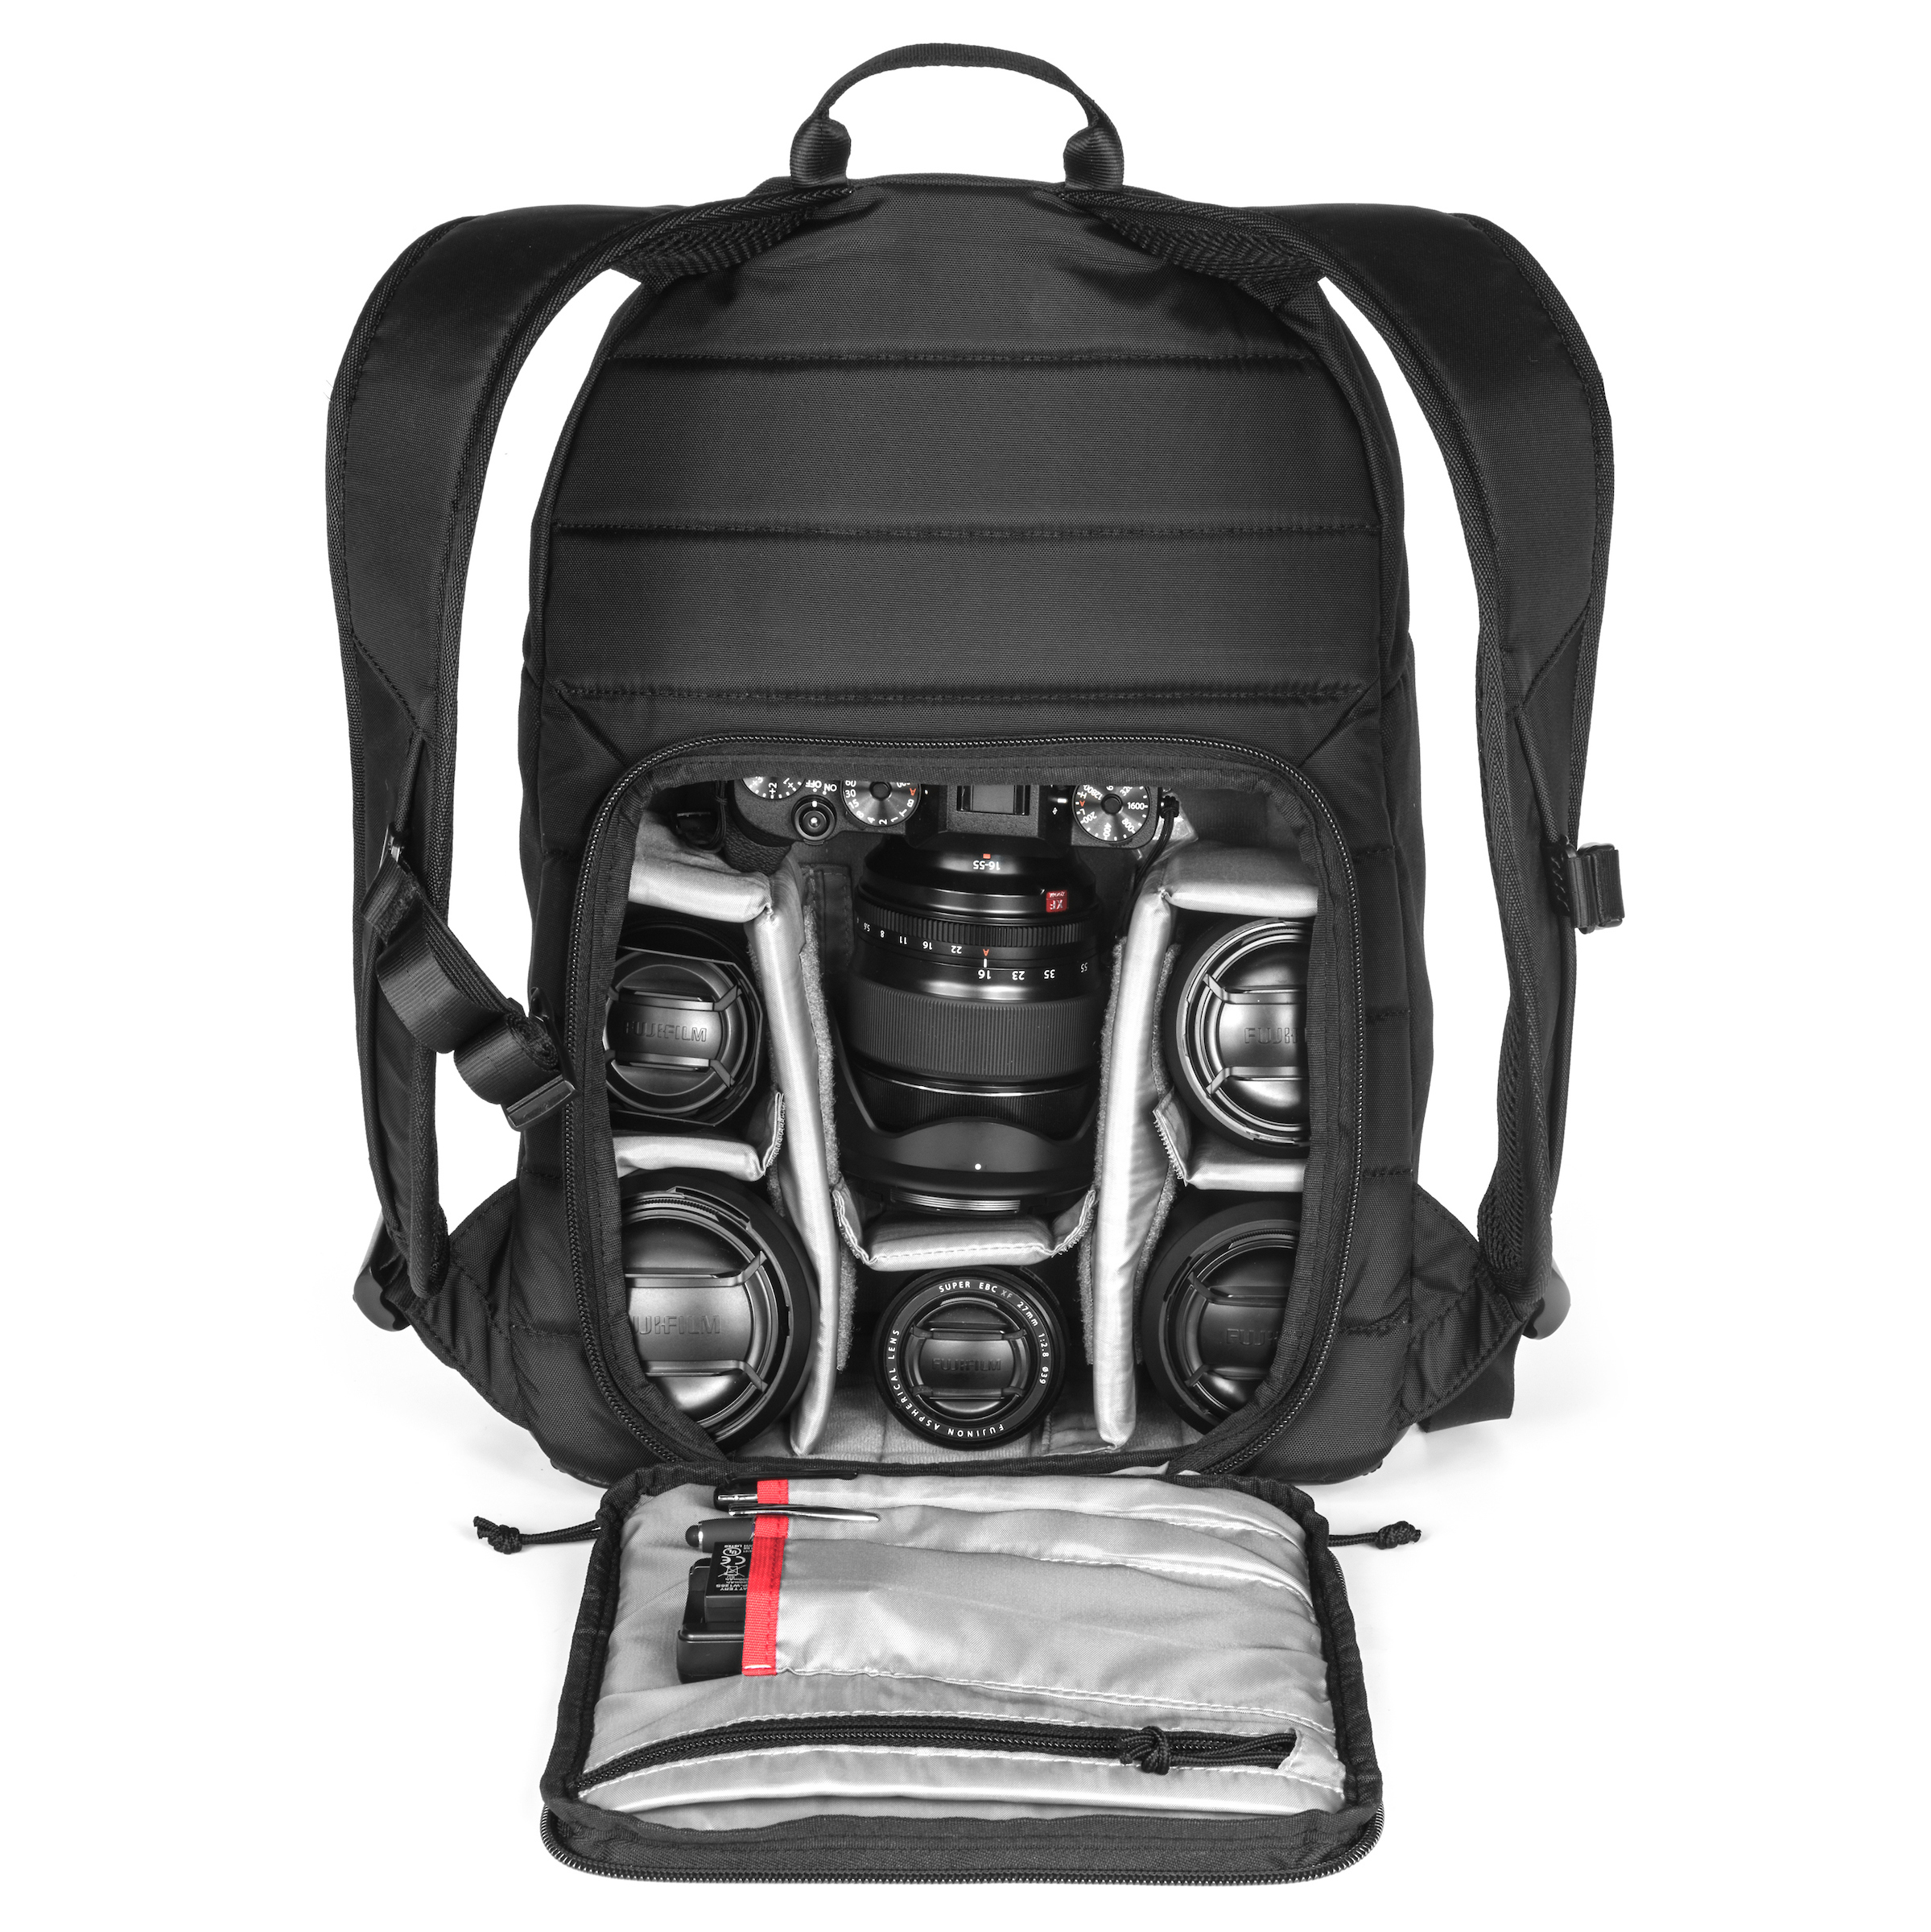 Rear Compartment of the Runyon backpack